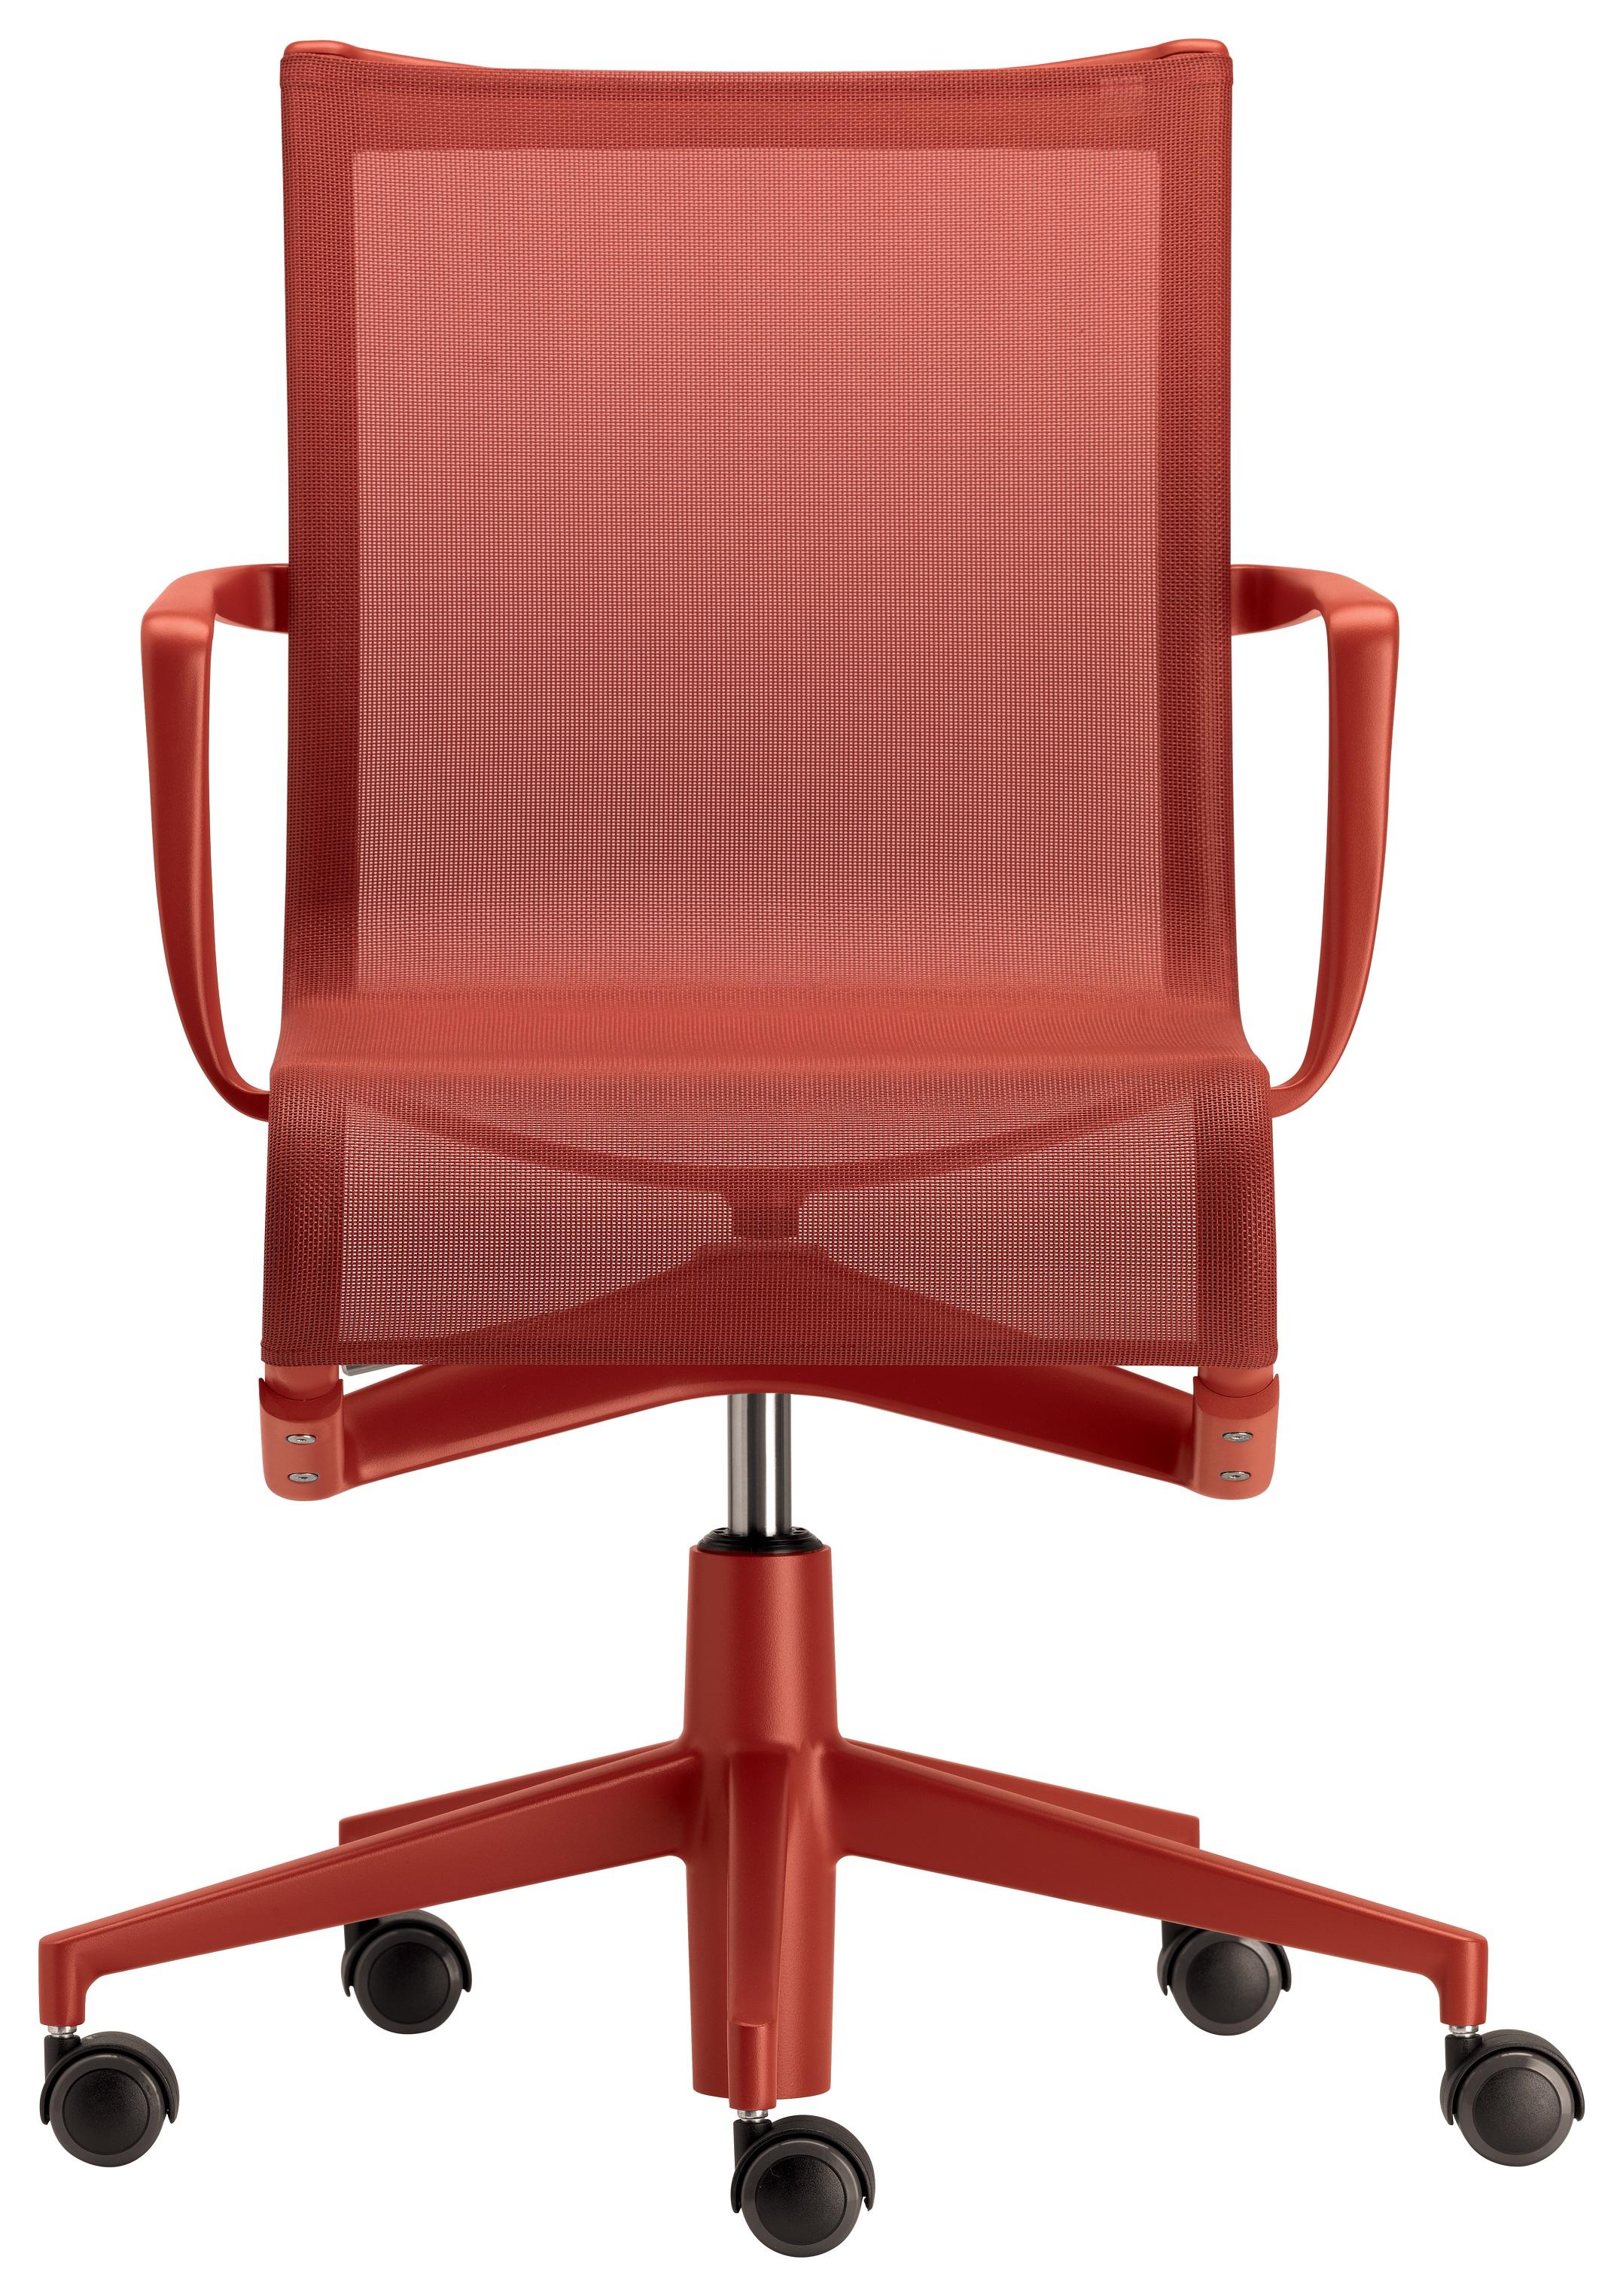 Italian Alias 434 Rollingframe 44 Chair in Coral Red Mesh & Red Lacquered Aluminum Frame For Sale